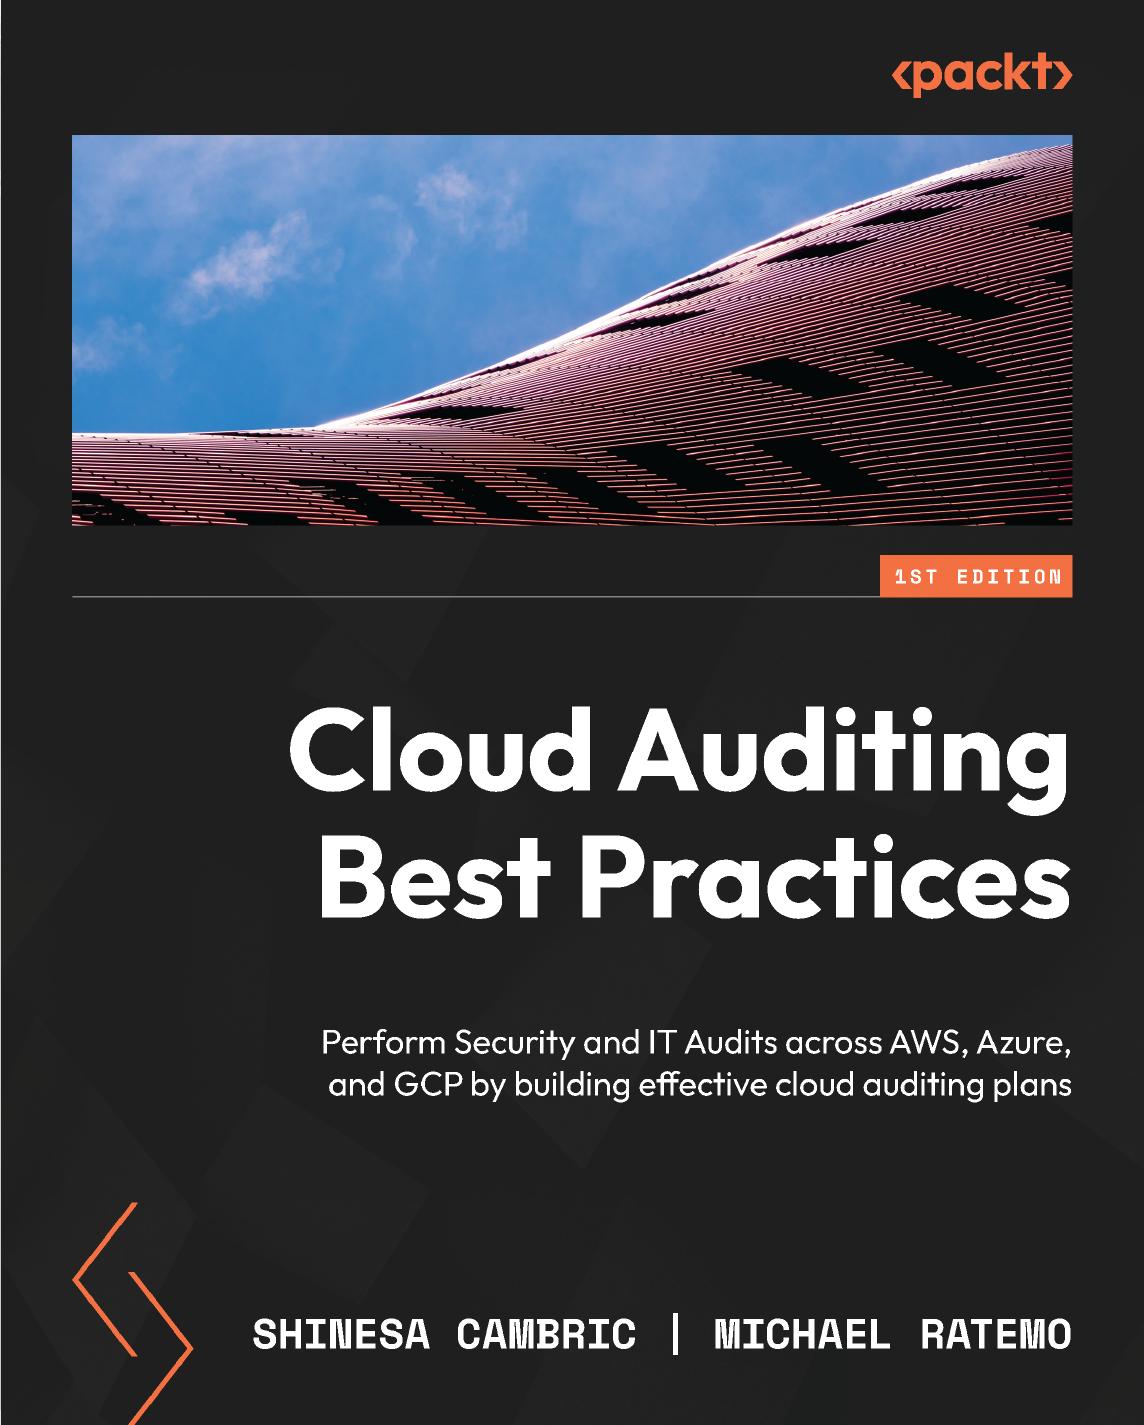 Cloud Auditing Best Practices: Perform Security and IT Audits across AWS, Azure, and GCP by building effective cloud auditing plans by Shinesa Cambric Michael Ratemo